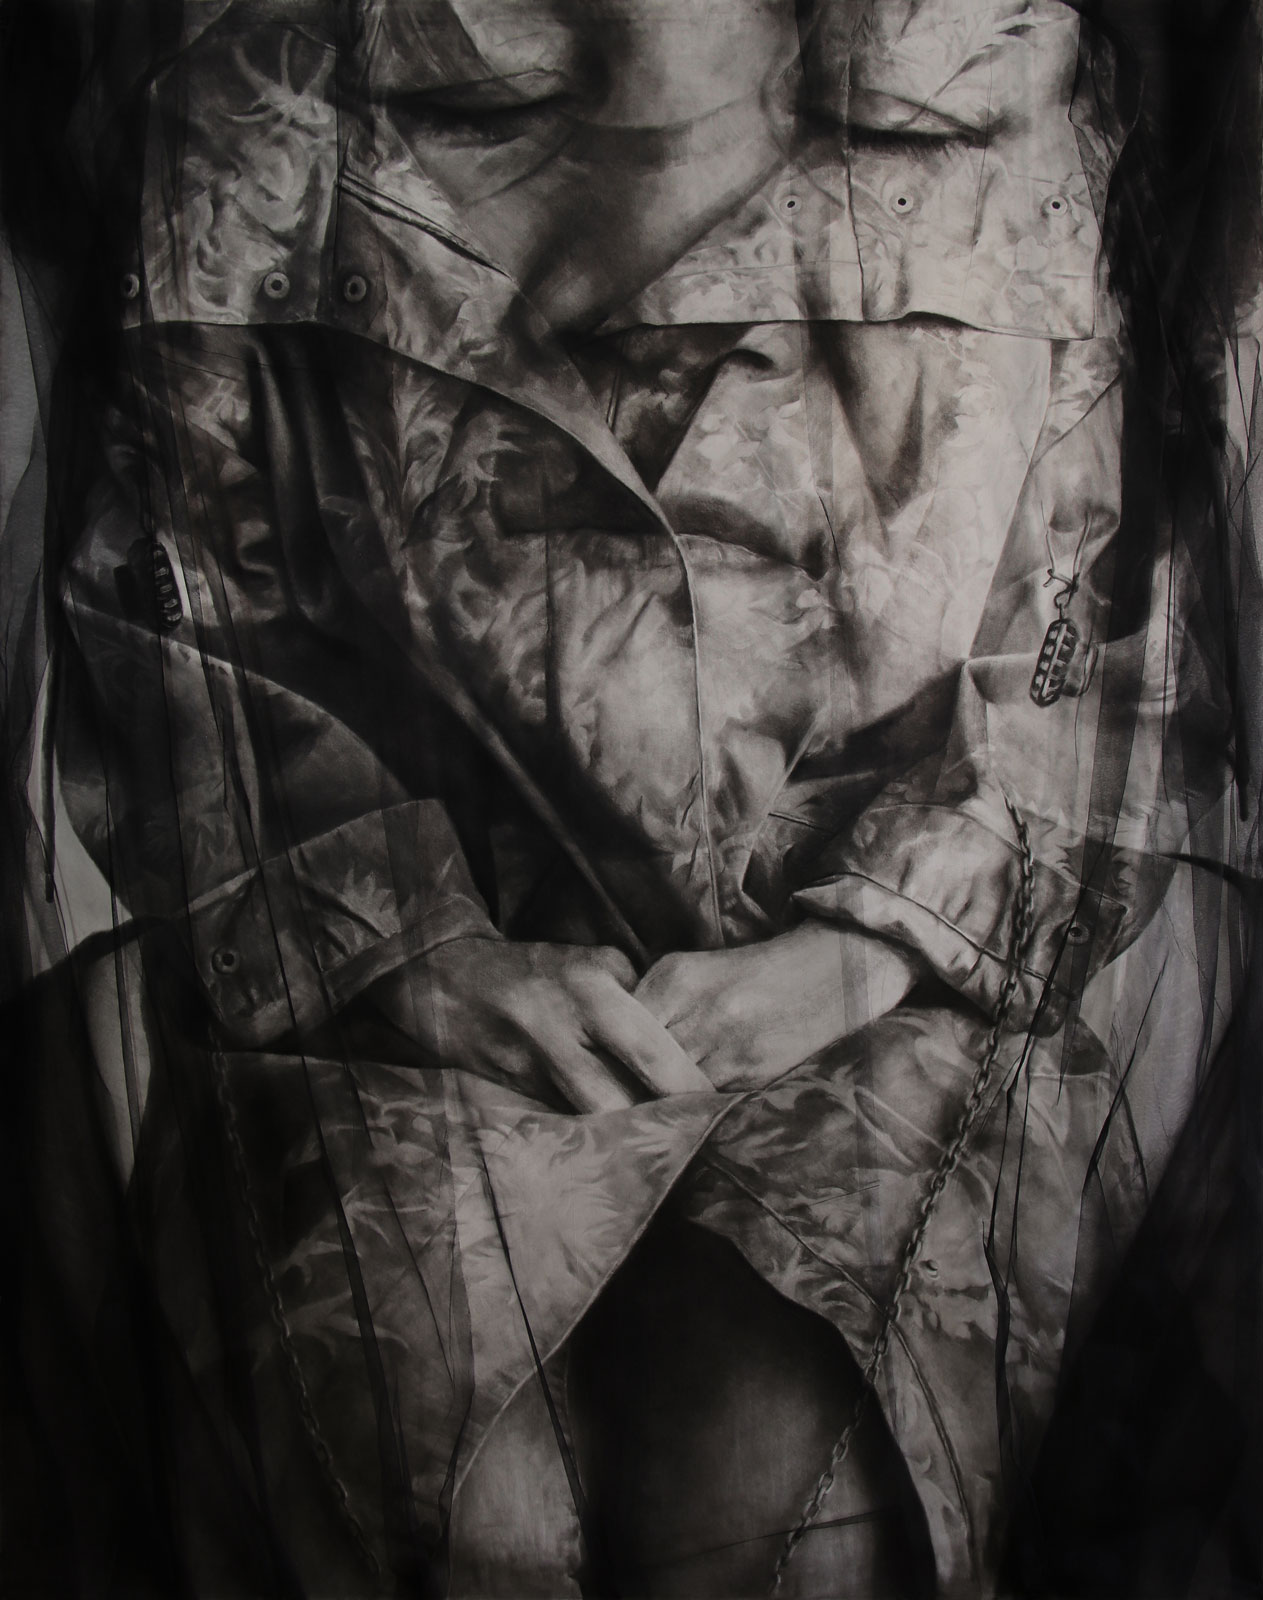 <p>190.150 cm, charcoal on paper & covered by lace</p>